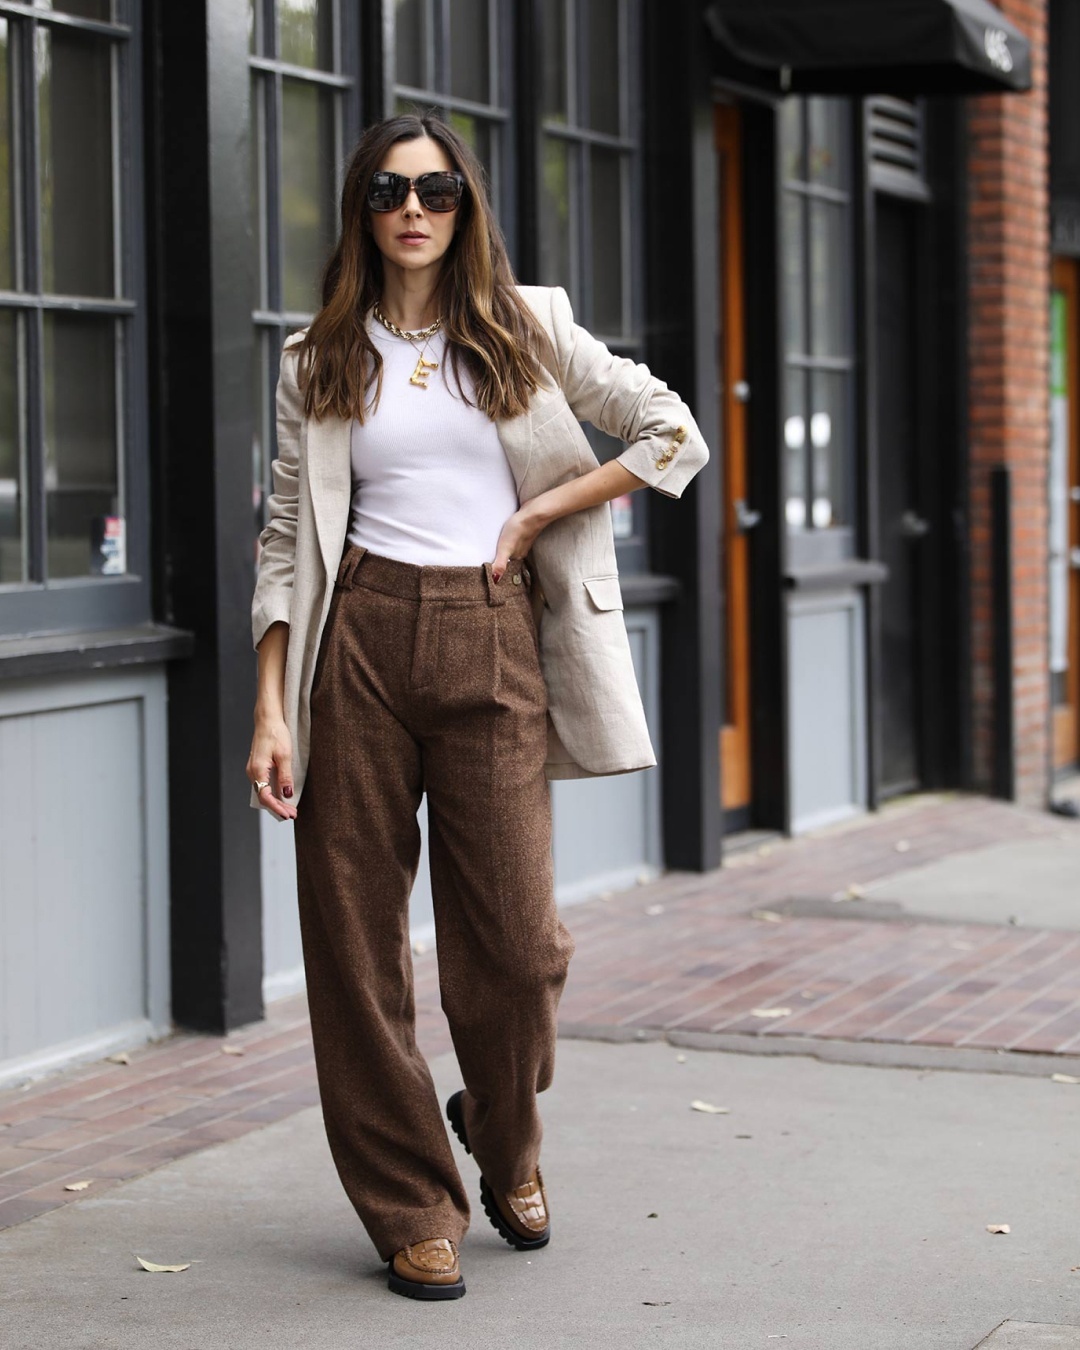 Pleated pants and neutral blazer outfit idea